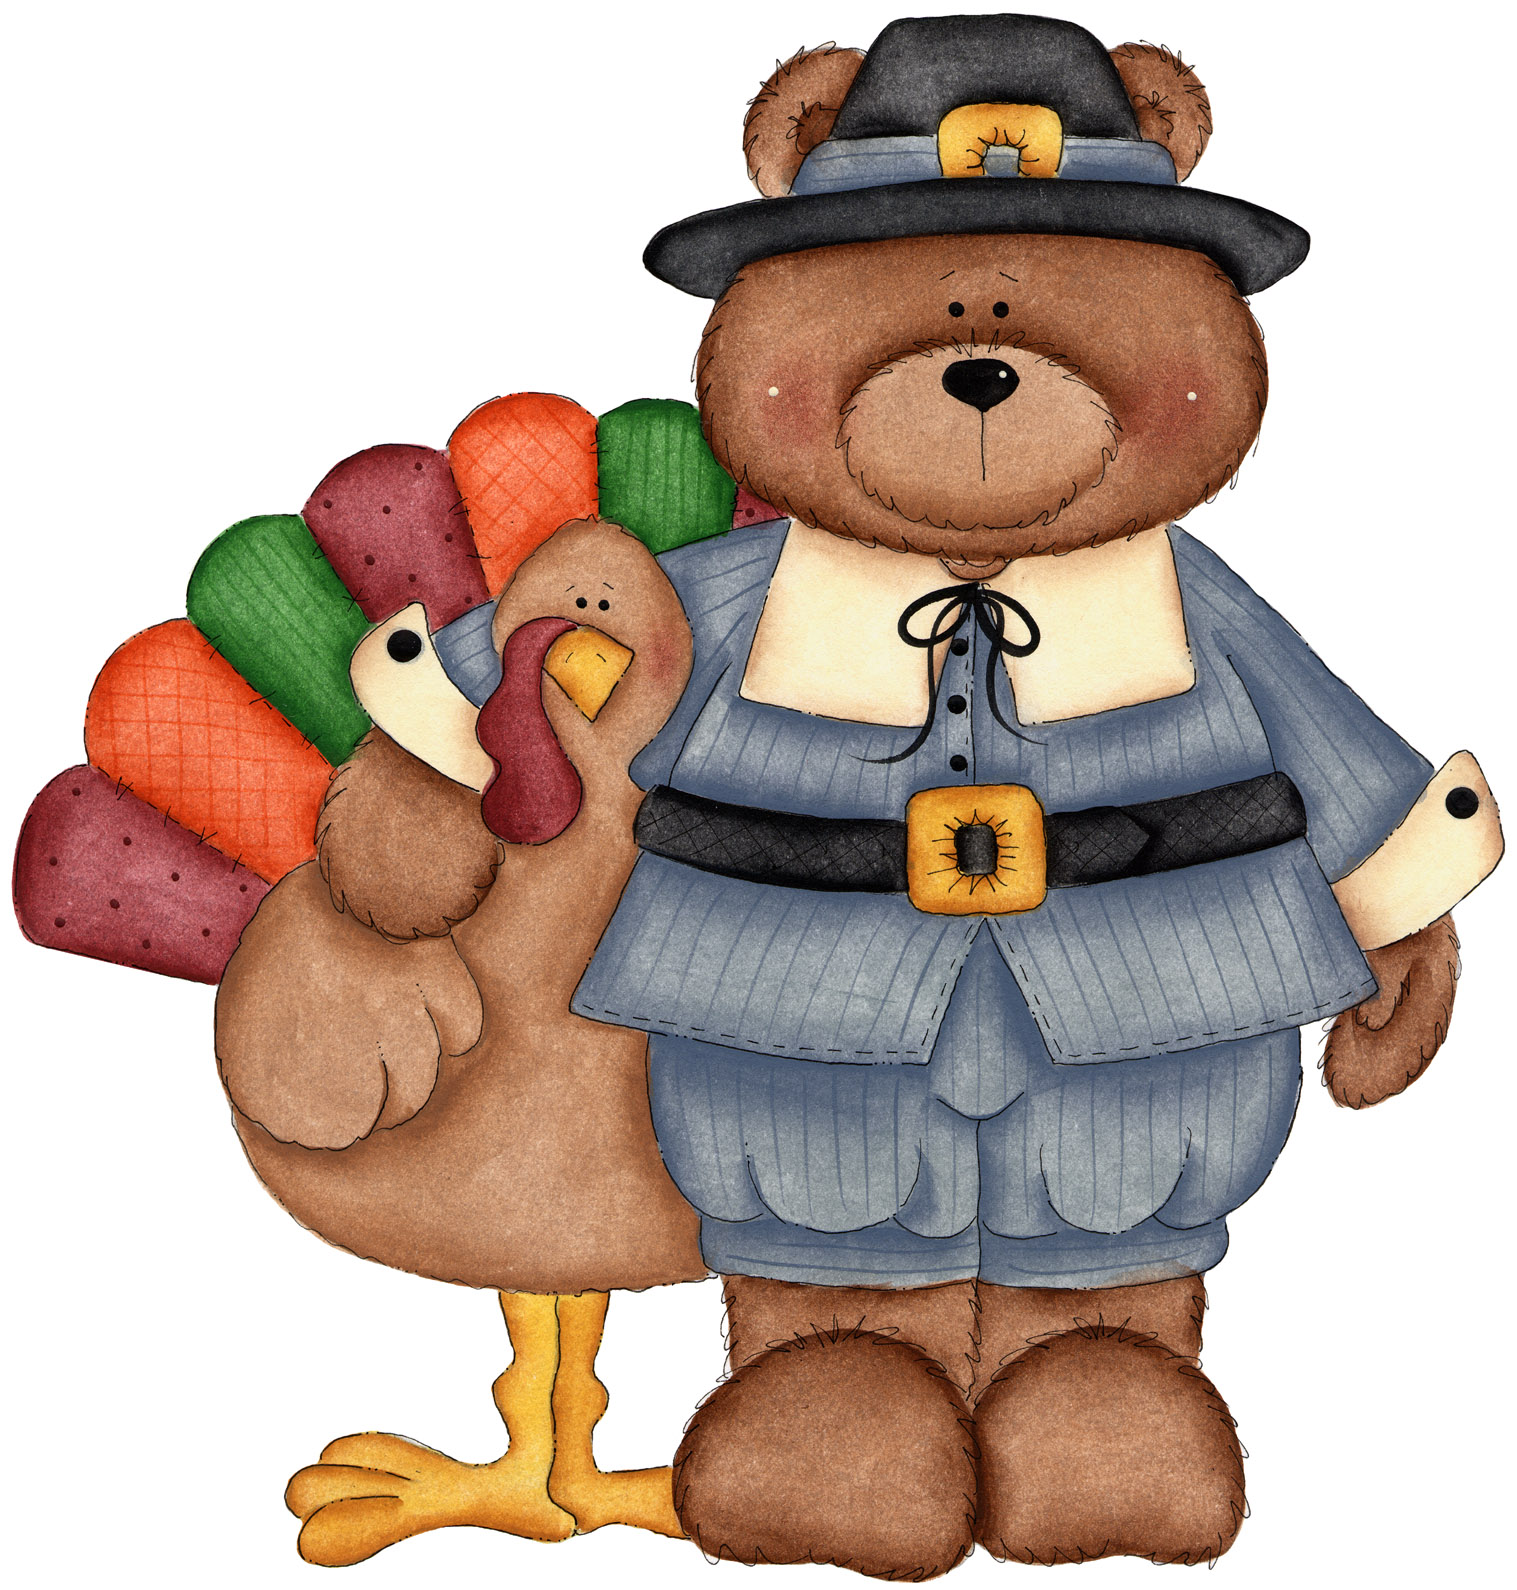 Clipart and Crafts Thanksgivi